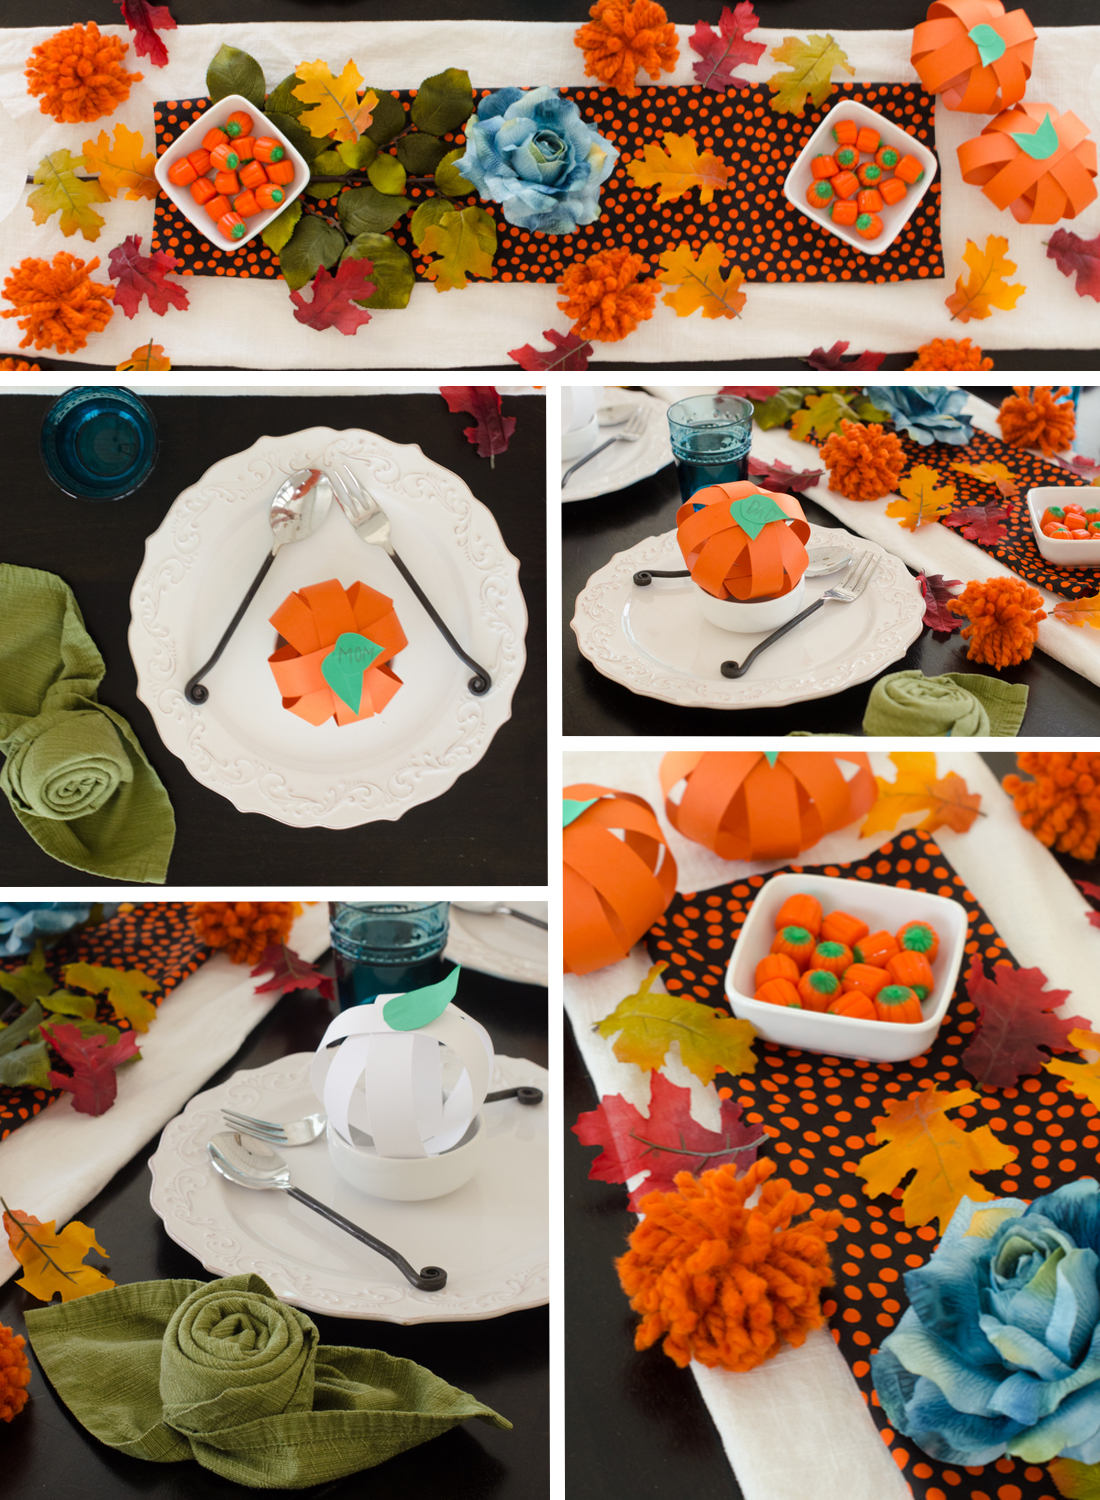 The Pumpkin Runner Tablescape collage from ChefSarahElizabeth.com